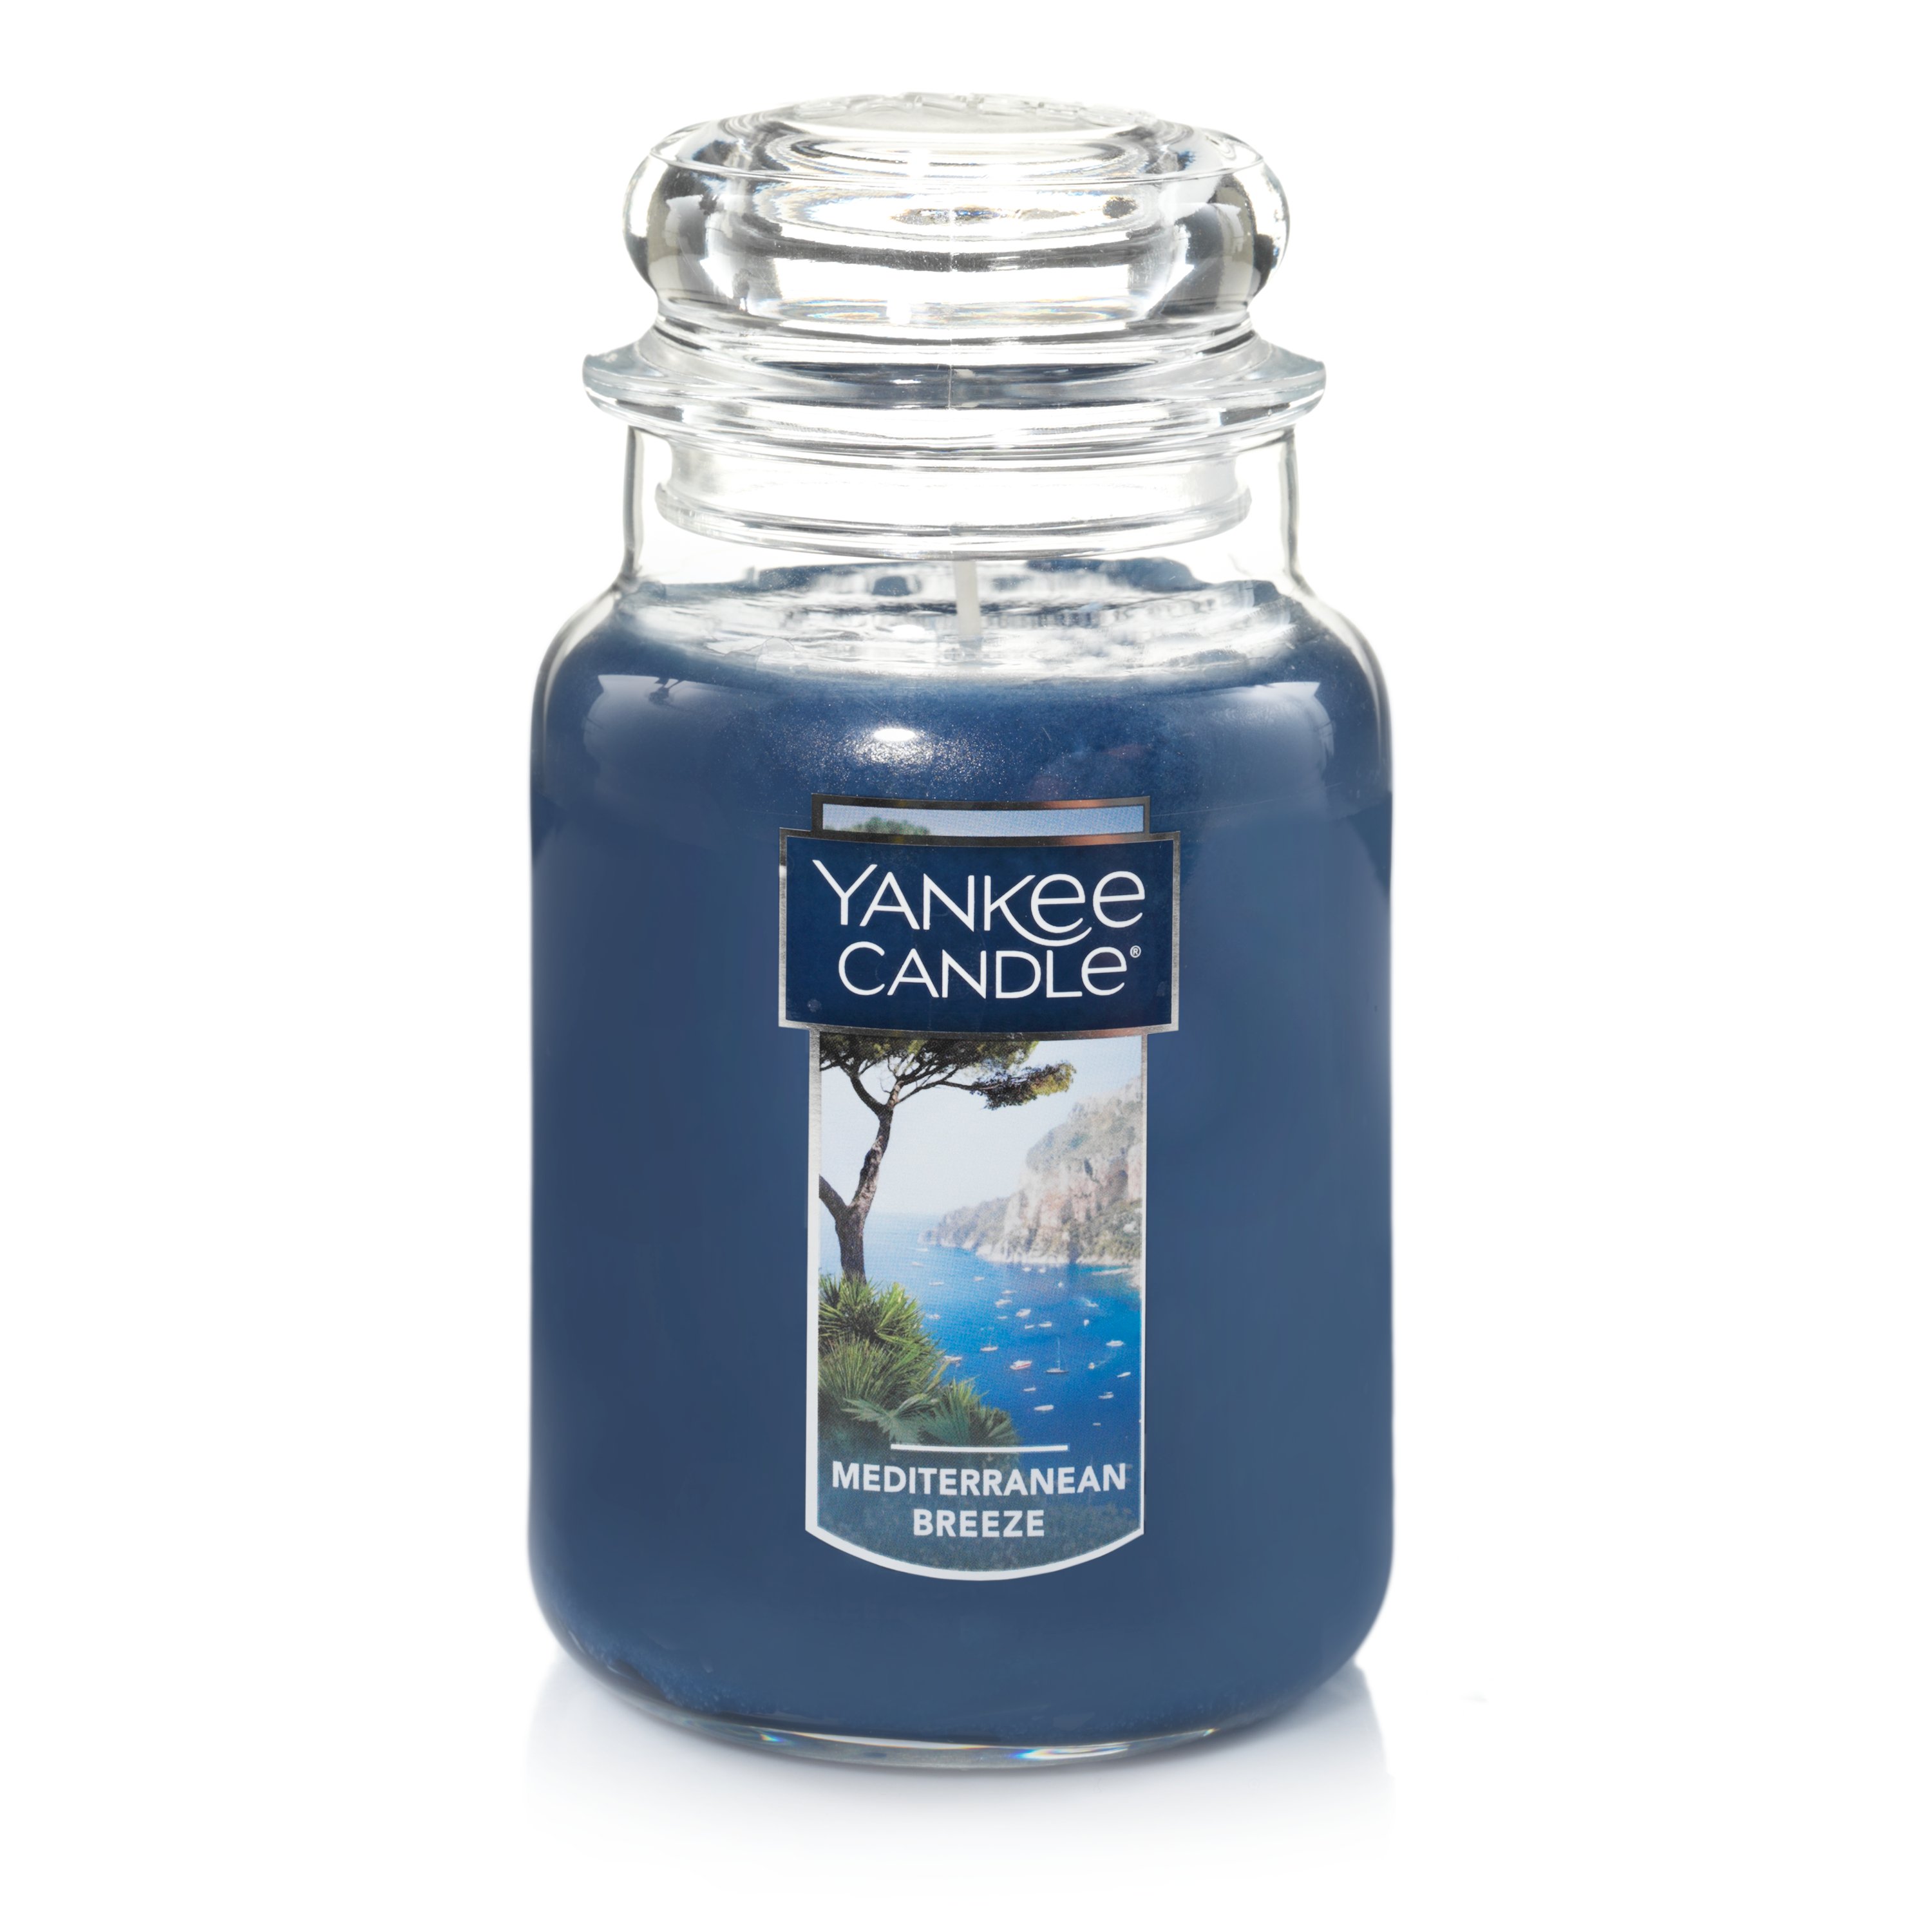 Yankee Candle Candle, Mediterranean Breeze - 1 candle, 22 oz